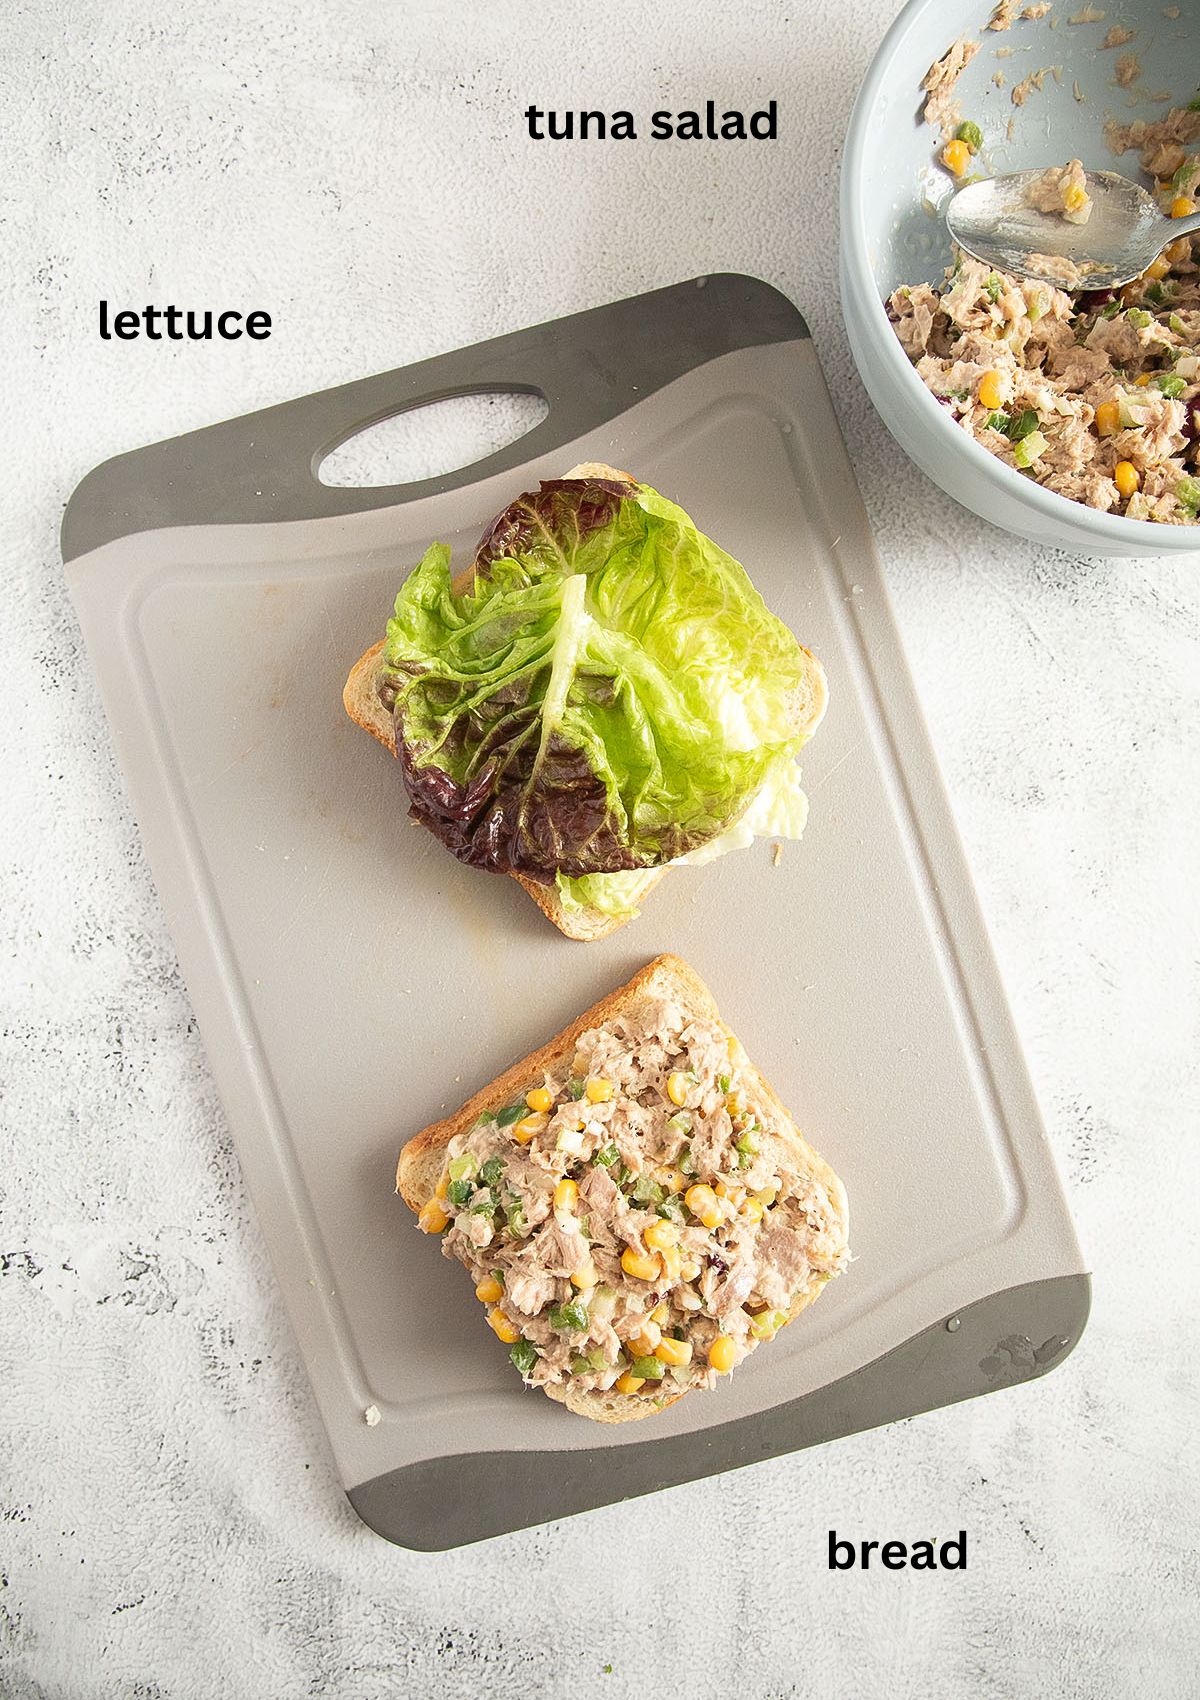 making a sandwich with tuna salad and lettuce on a cutting board.